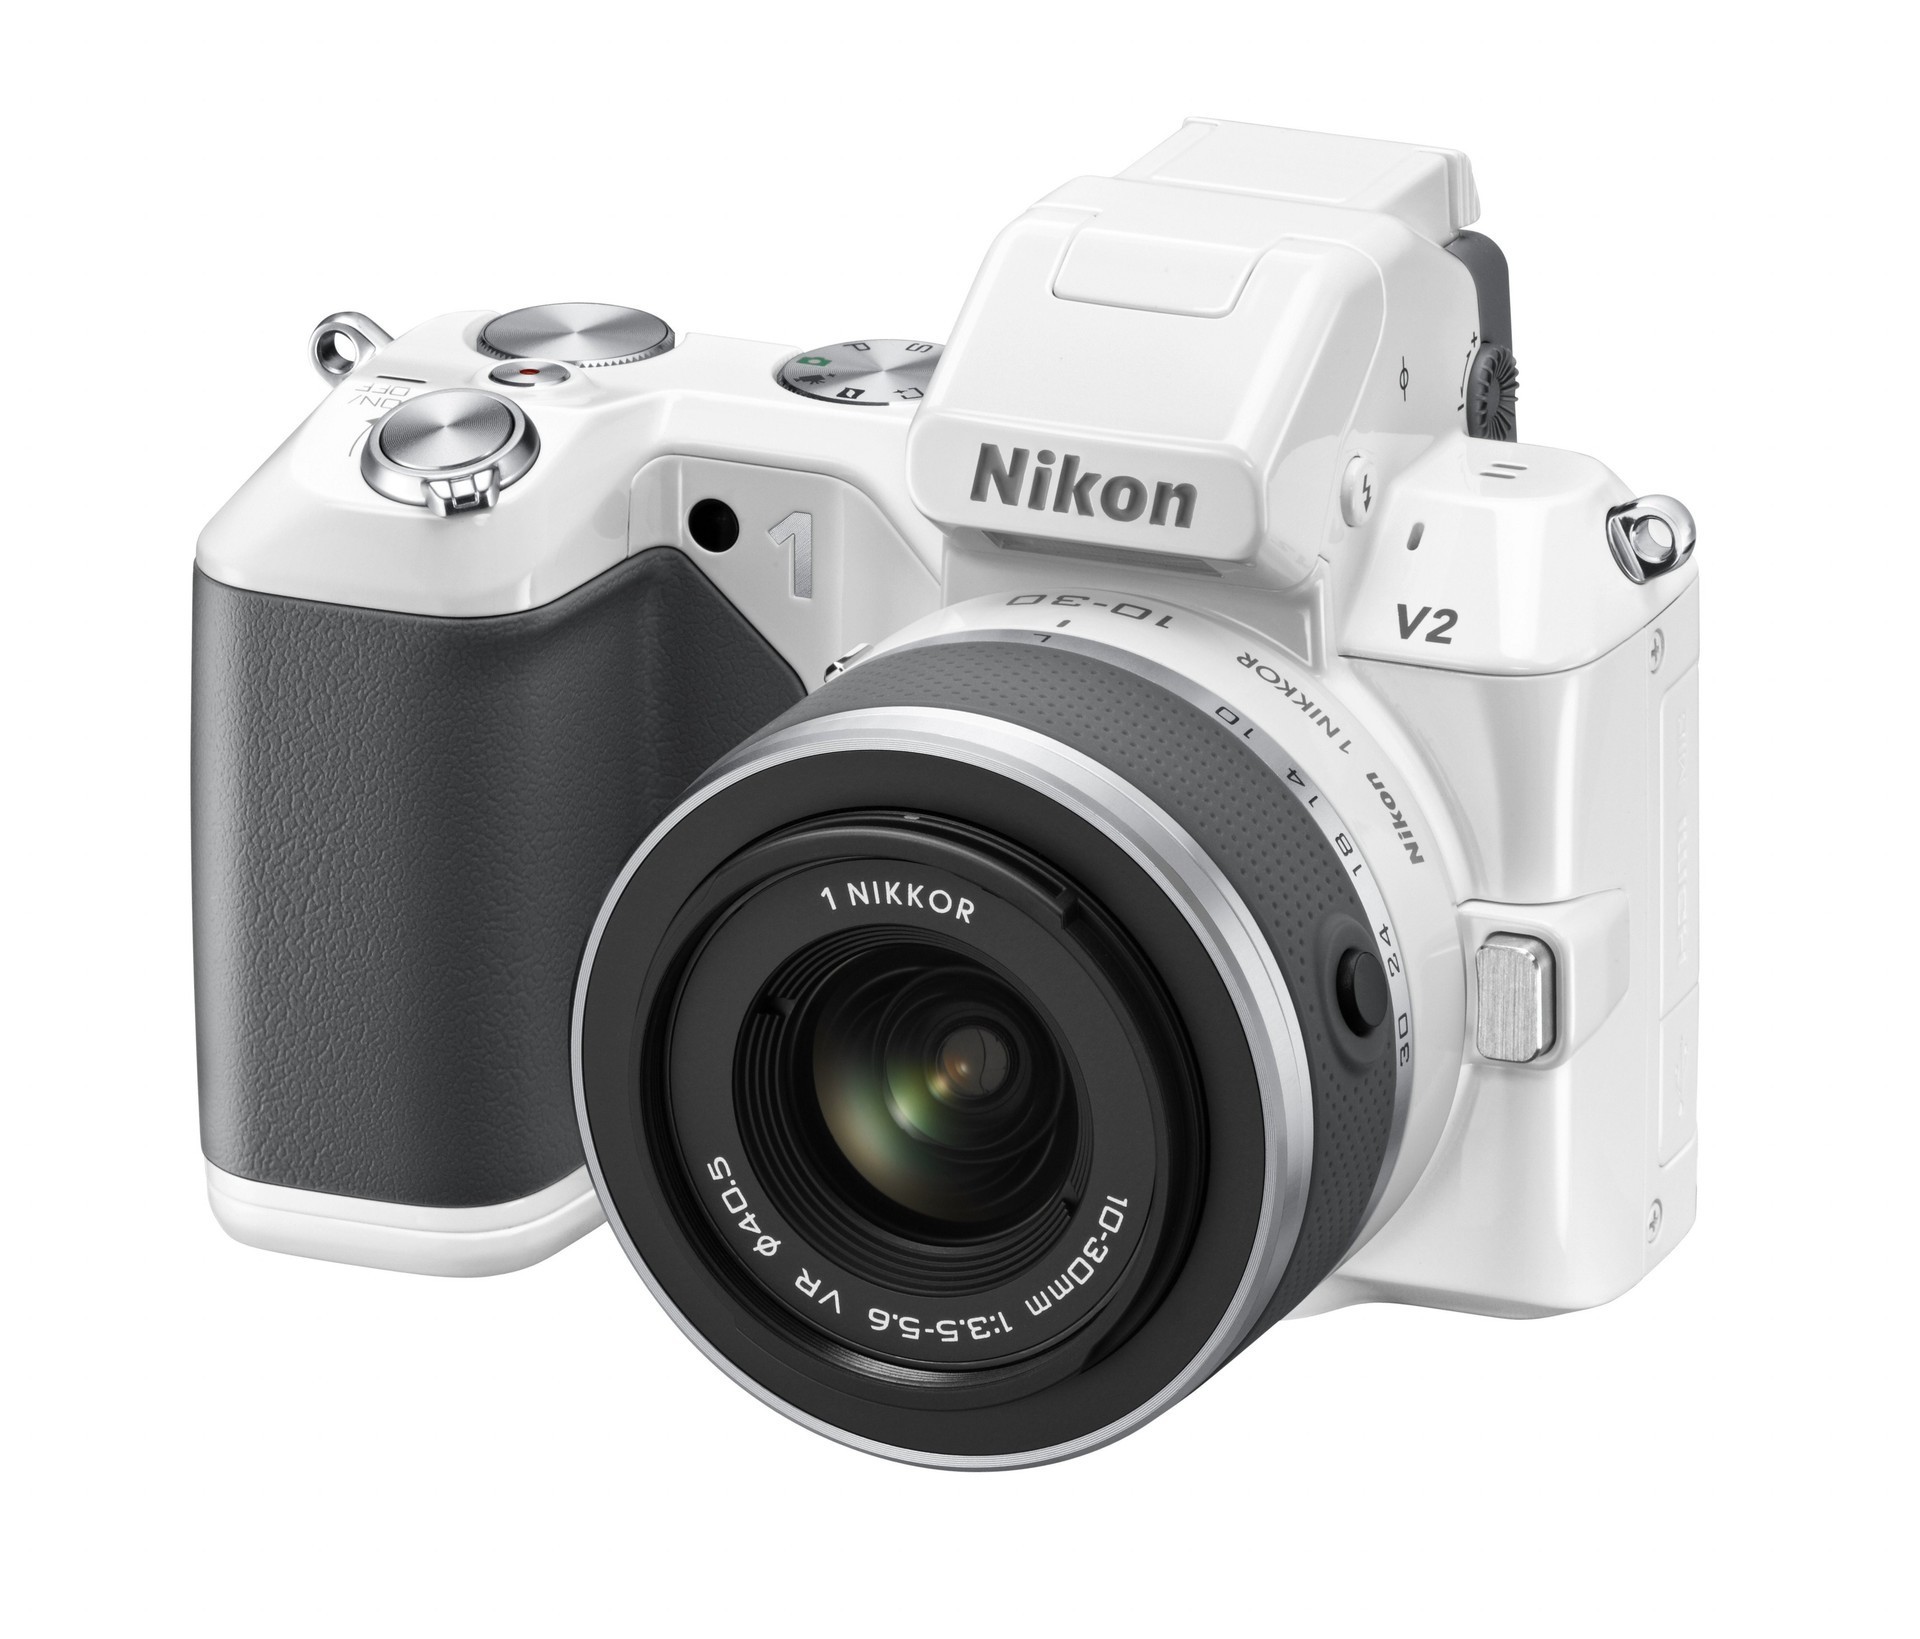 Nikon 1 V2 Camera Now Benefits from New Firmware Version 1.21